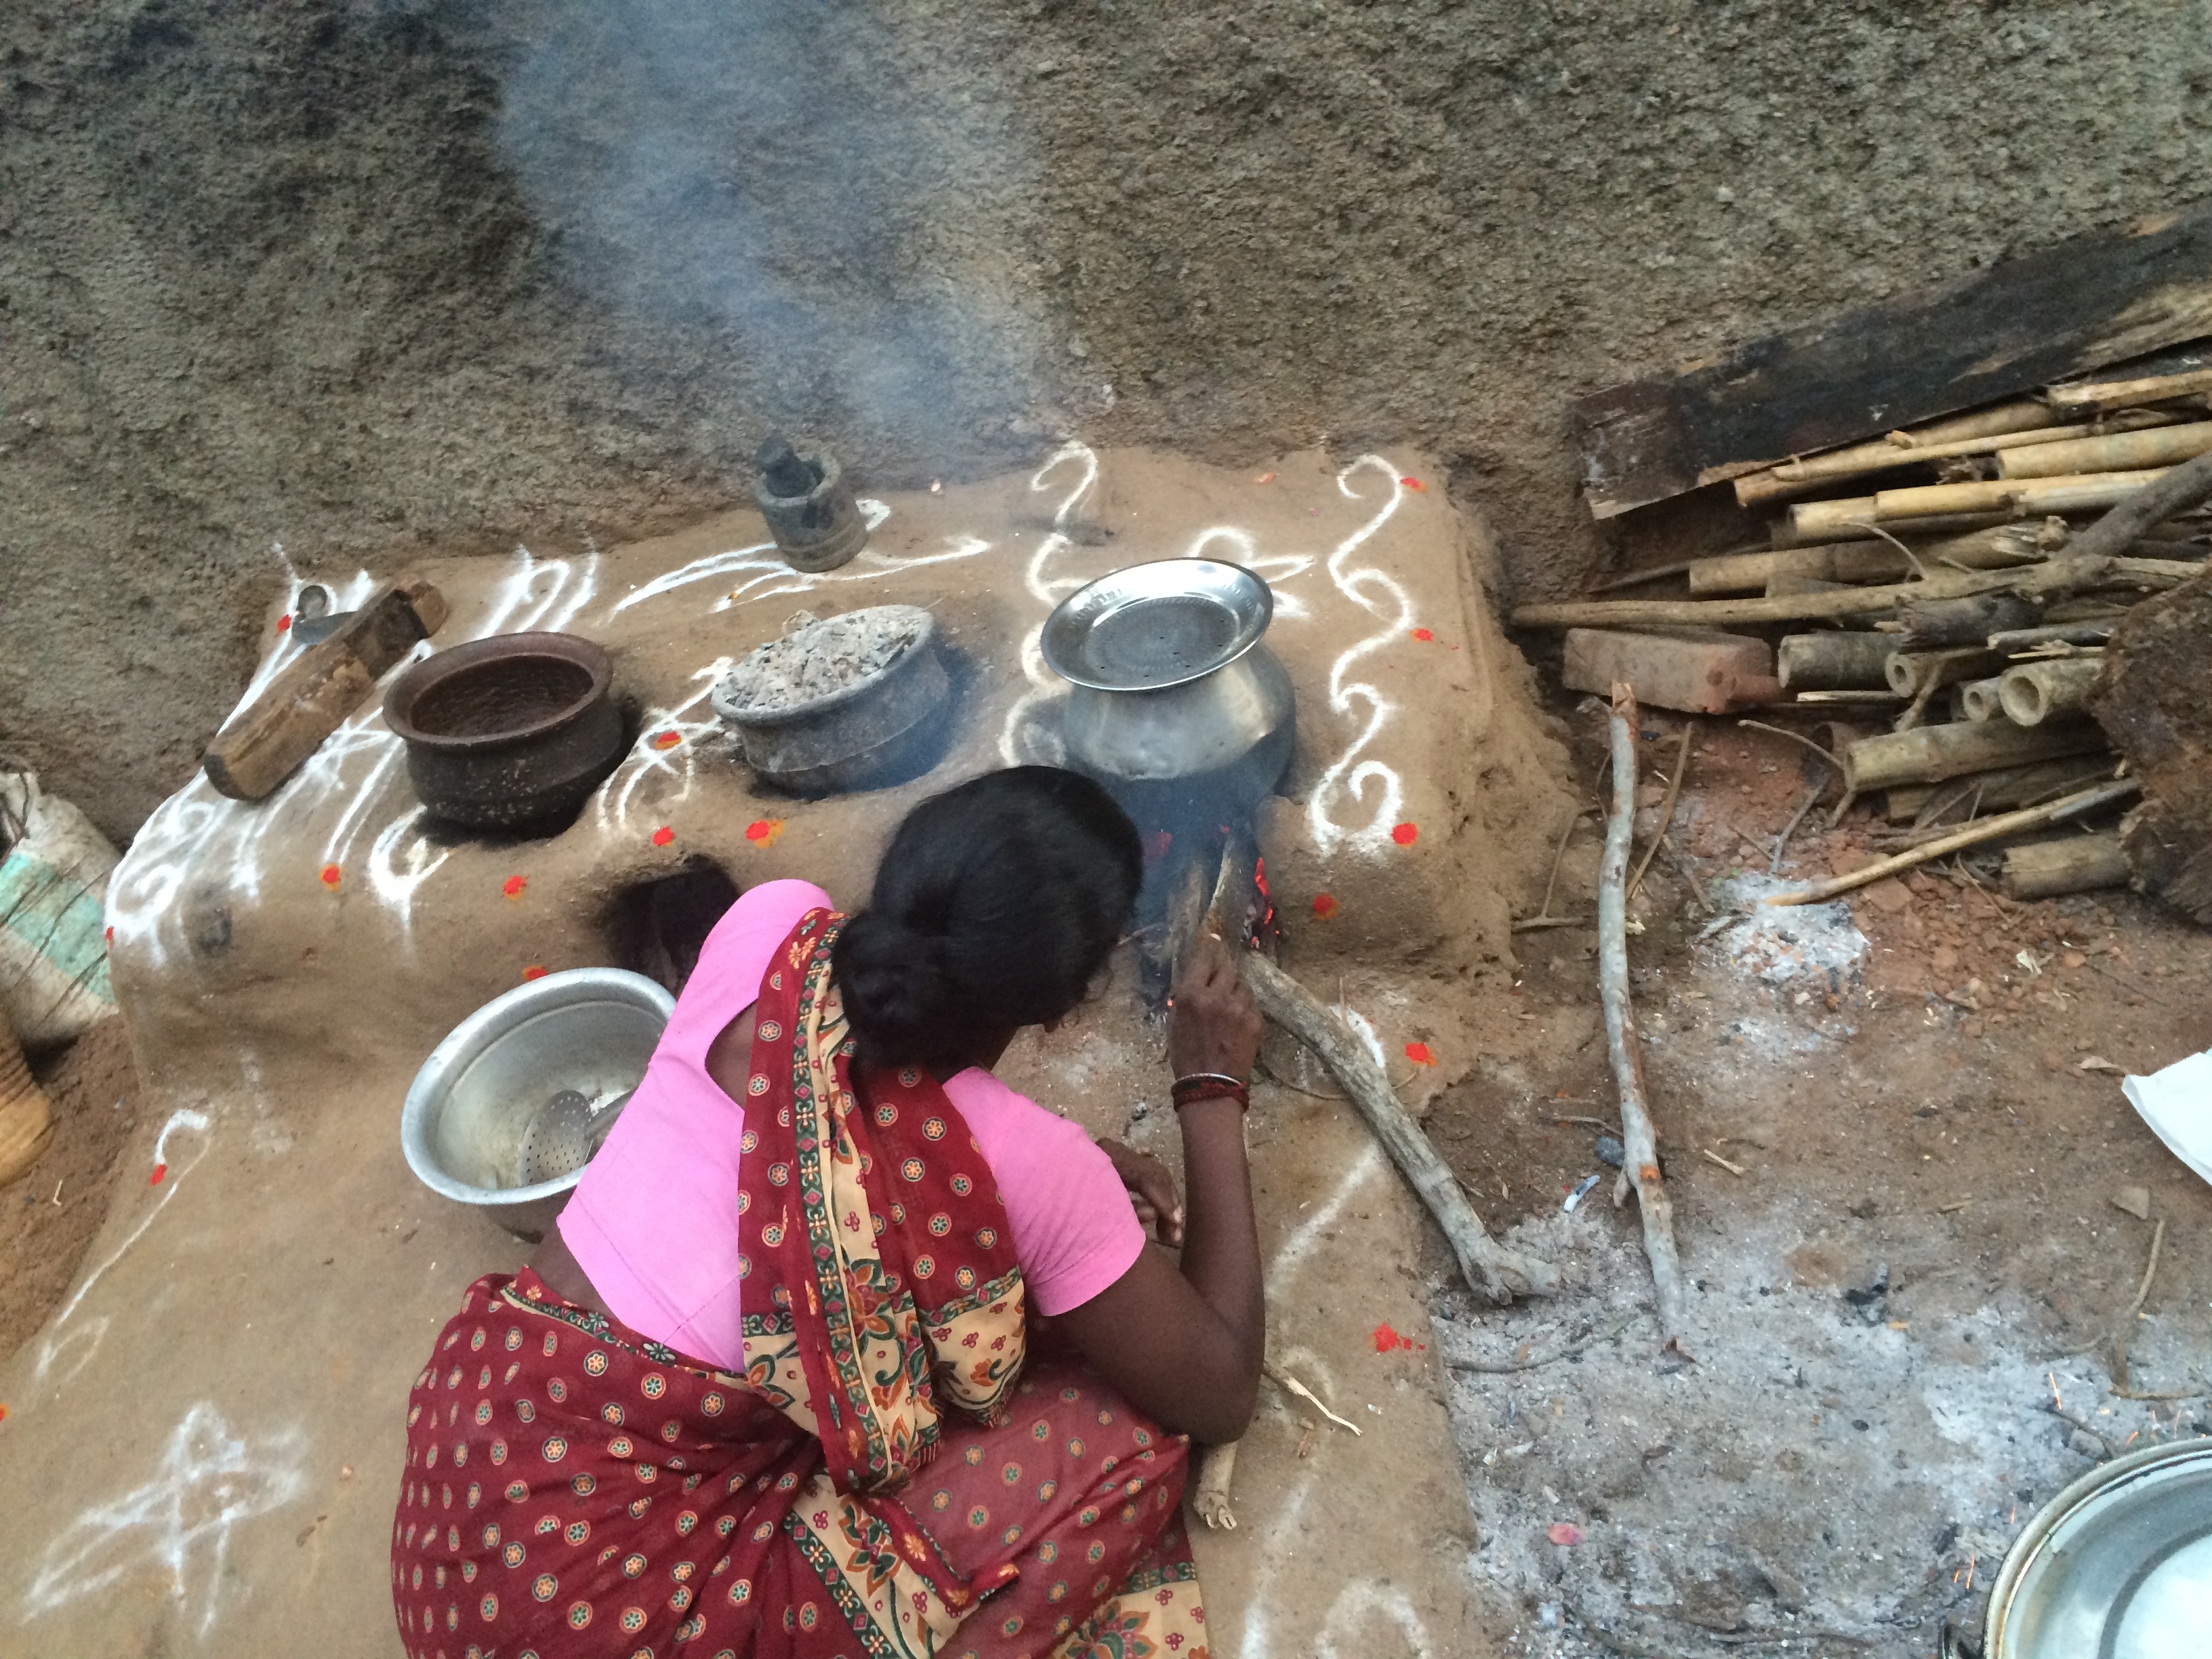 The vast majority of wood-burning cooking stoves in India are built into the kitchen or cooking area but this is not the way most improved cookstoves are built. This was the basis for the design direction of a built in stove for Prakti.